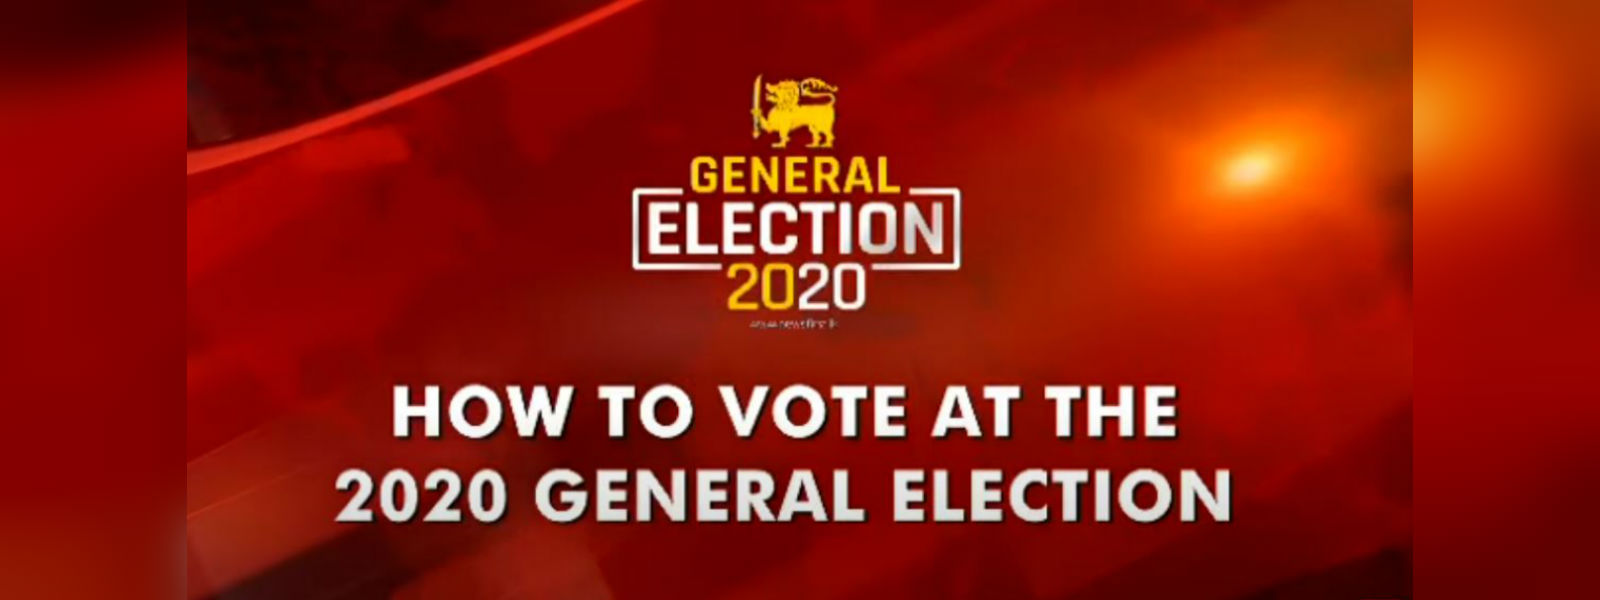 How to vote at the 2020 General Election on the 5th of August